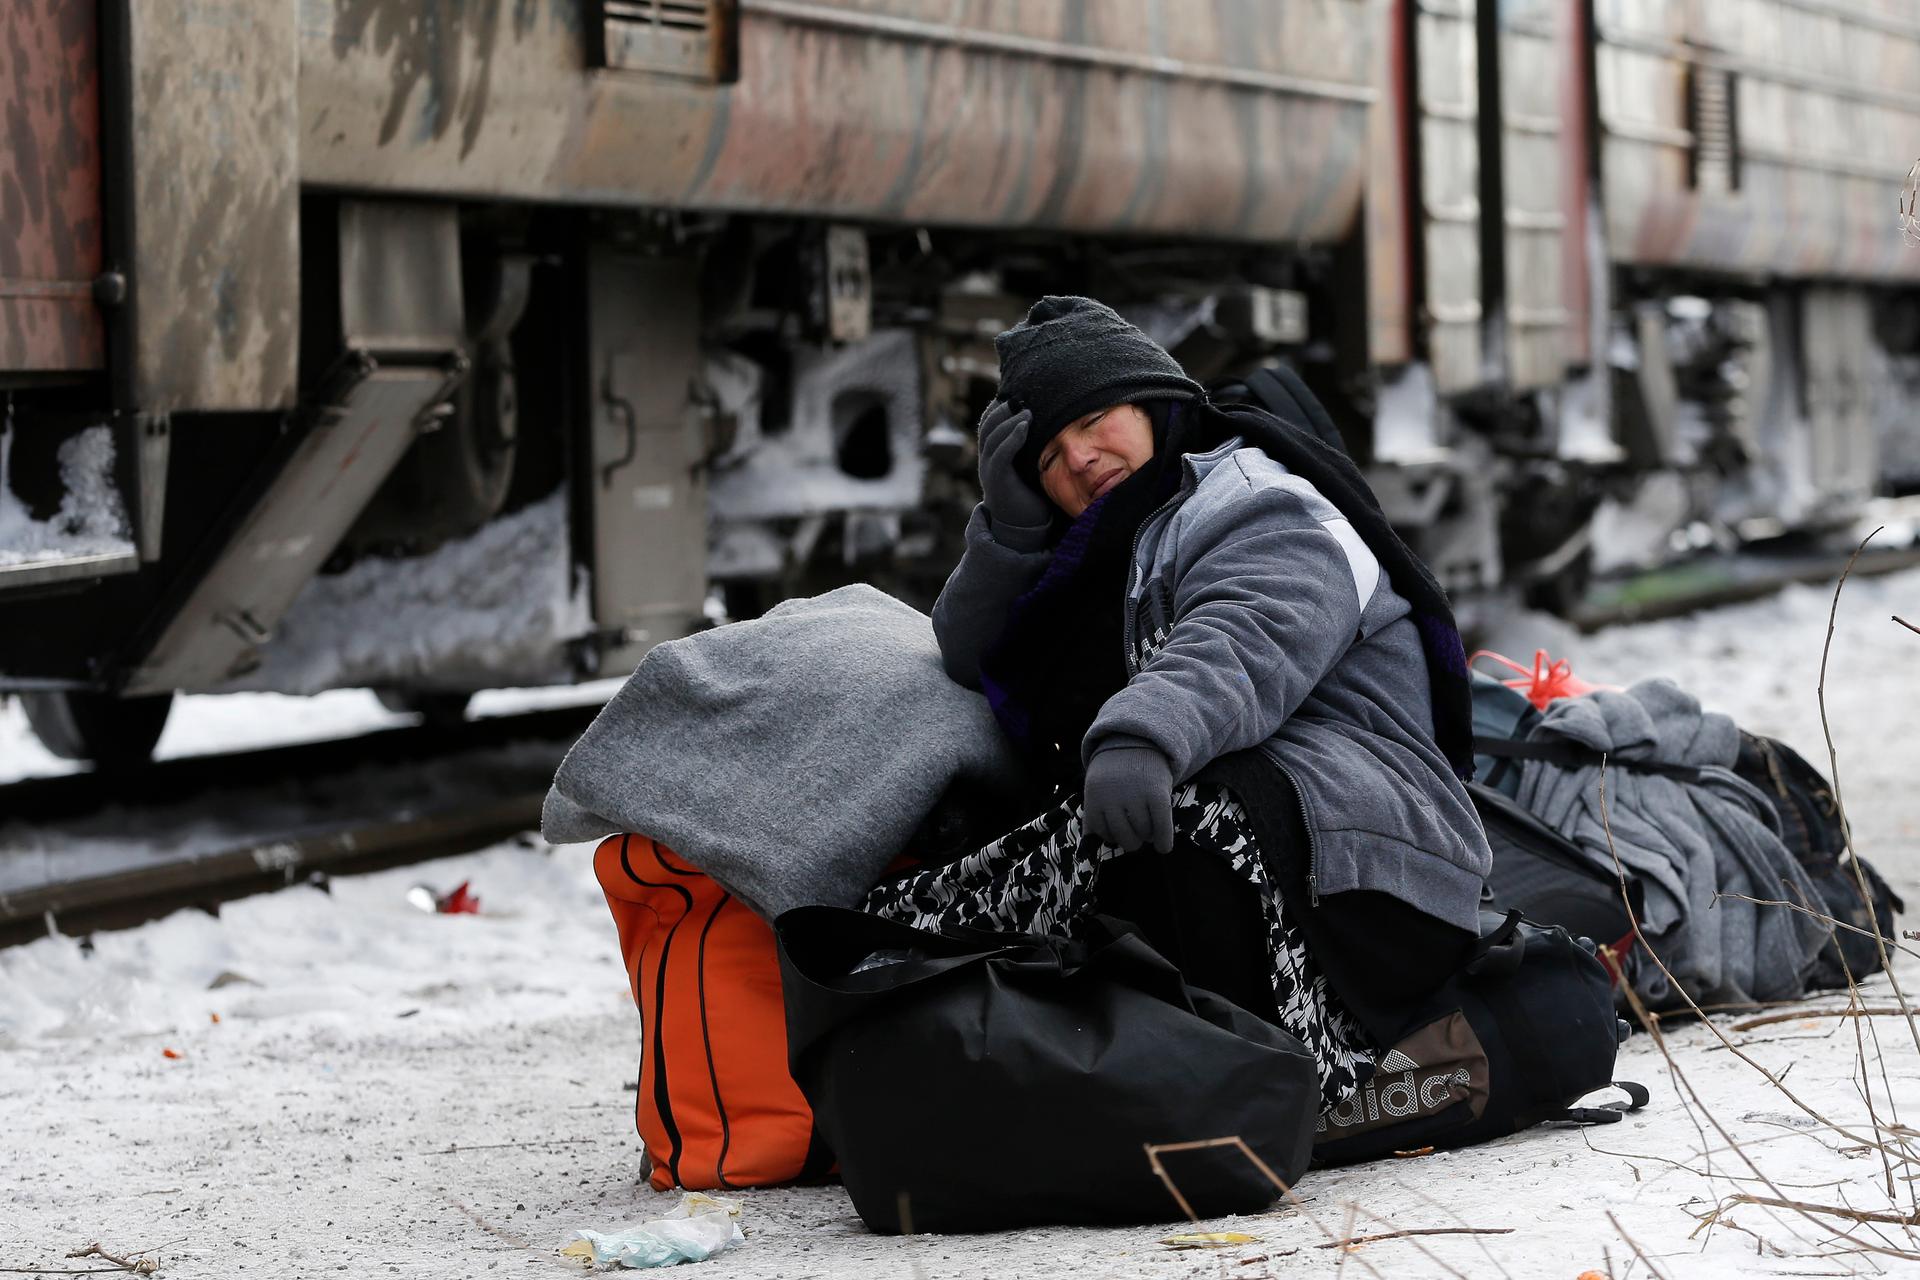 A migrant sits on her bags while waiting for a train in Presevo, Serbia.